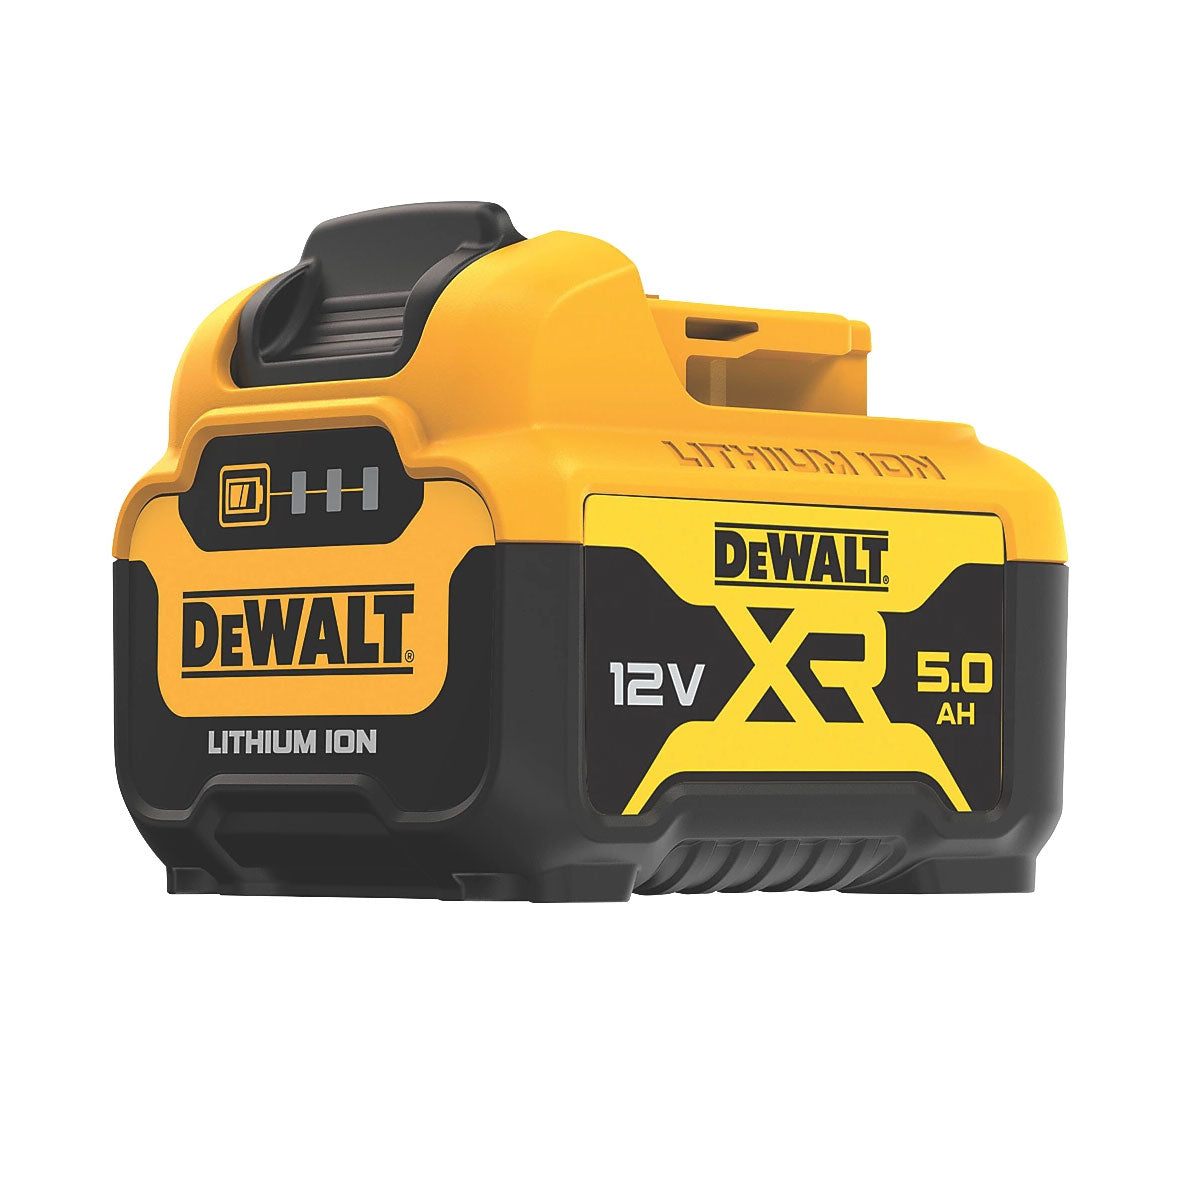 Dewalt DCS512P2 12V Brushless Circular Saw with 2 x 5.0Ah Batteries Charger In Case